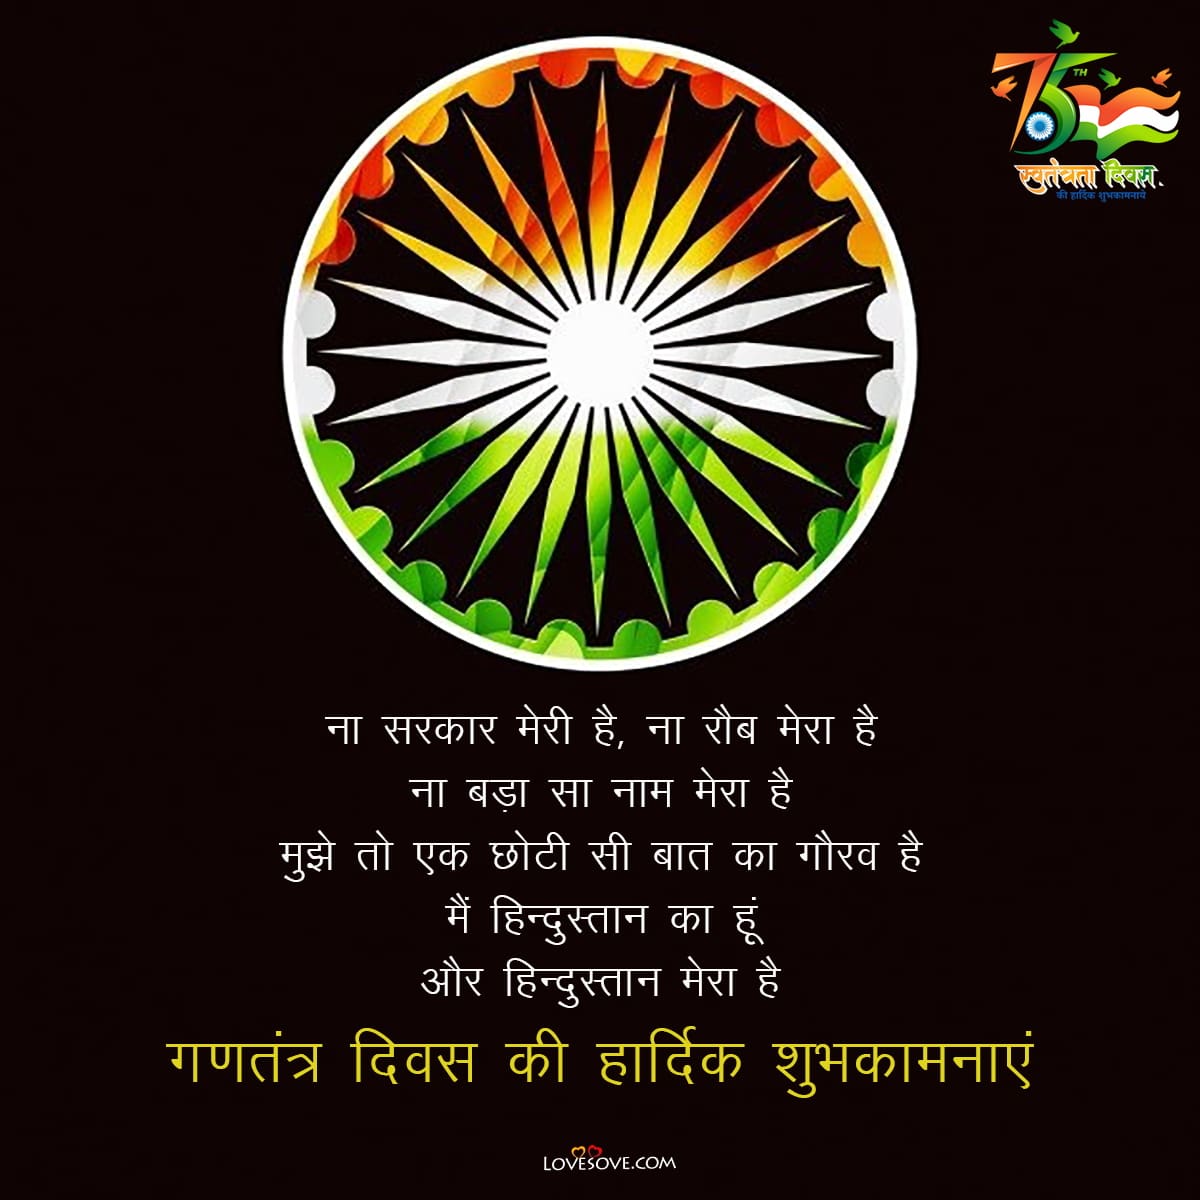 Happy 75th republic day wishes, republic day wishes